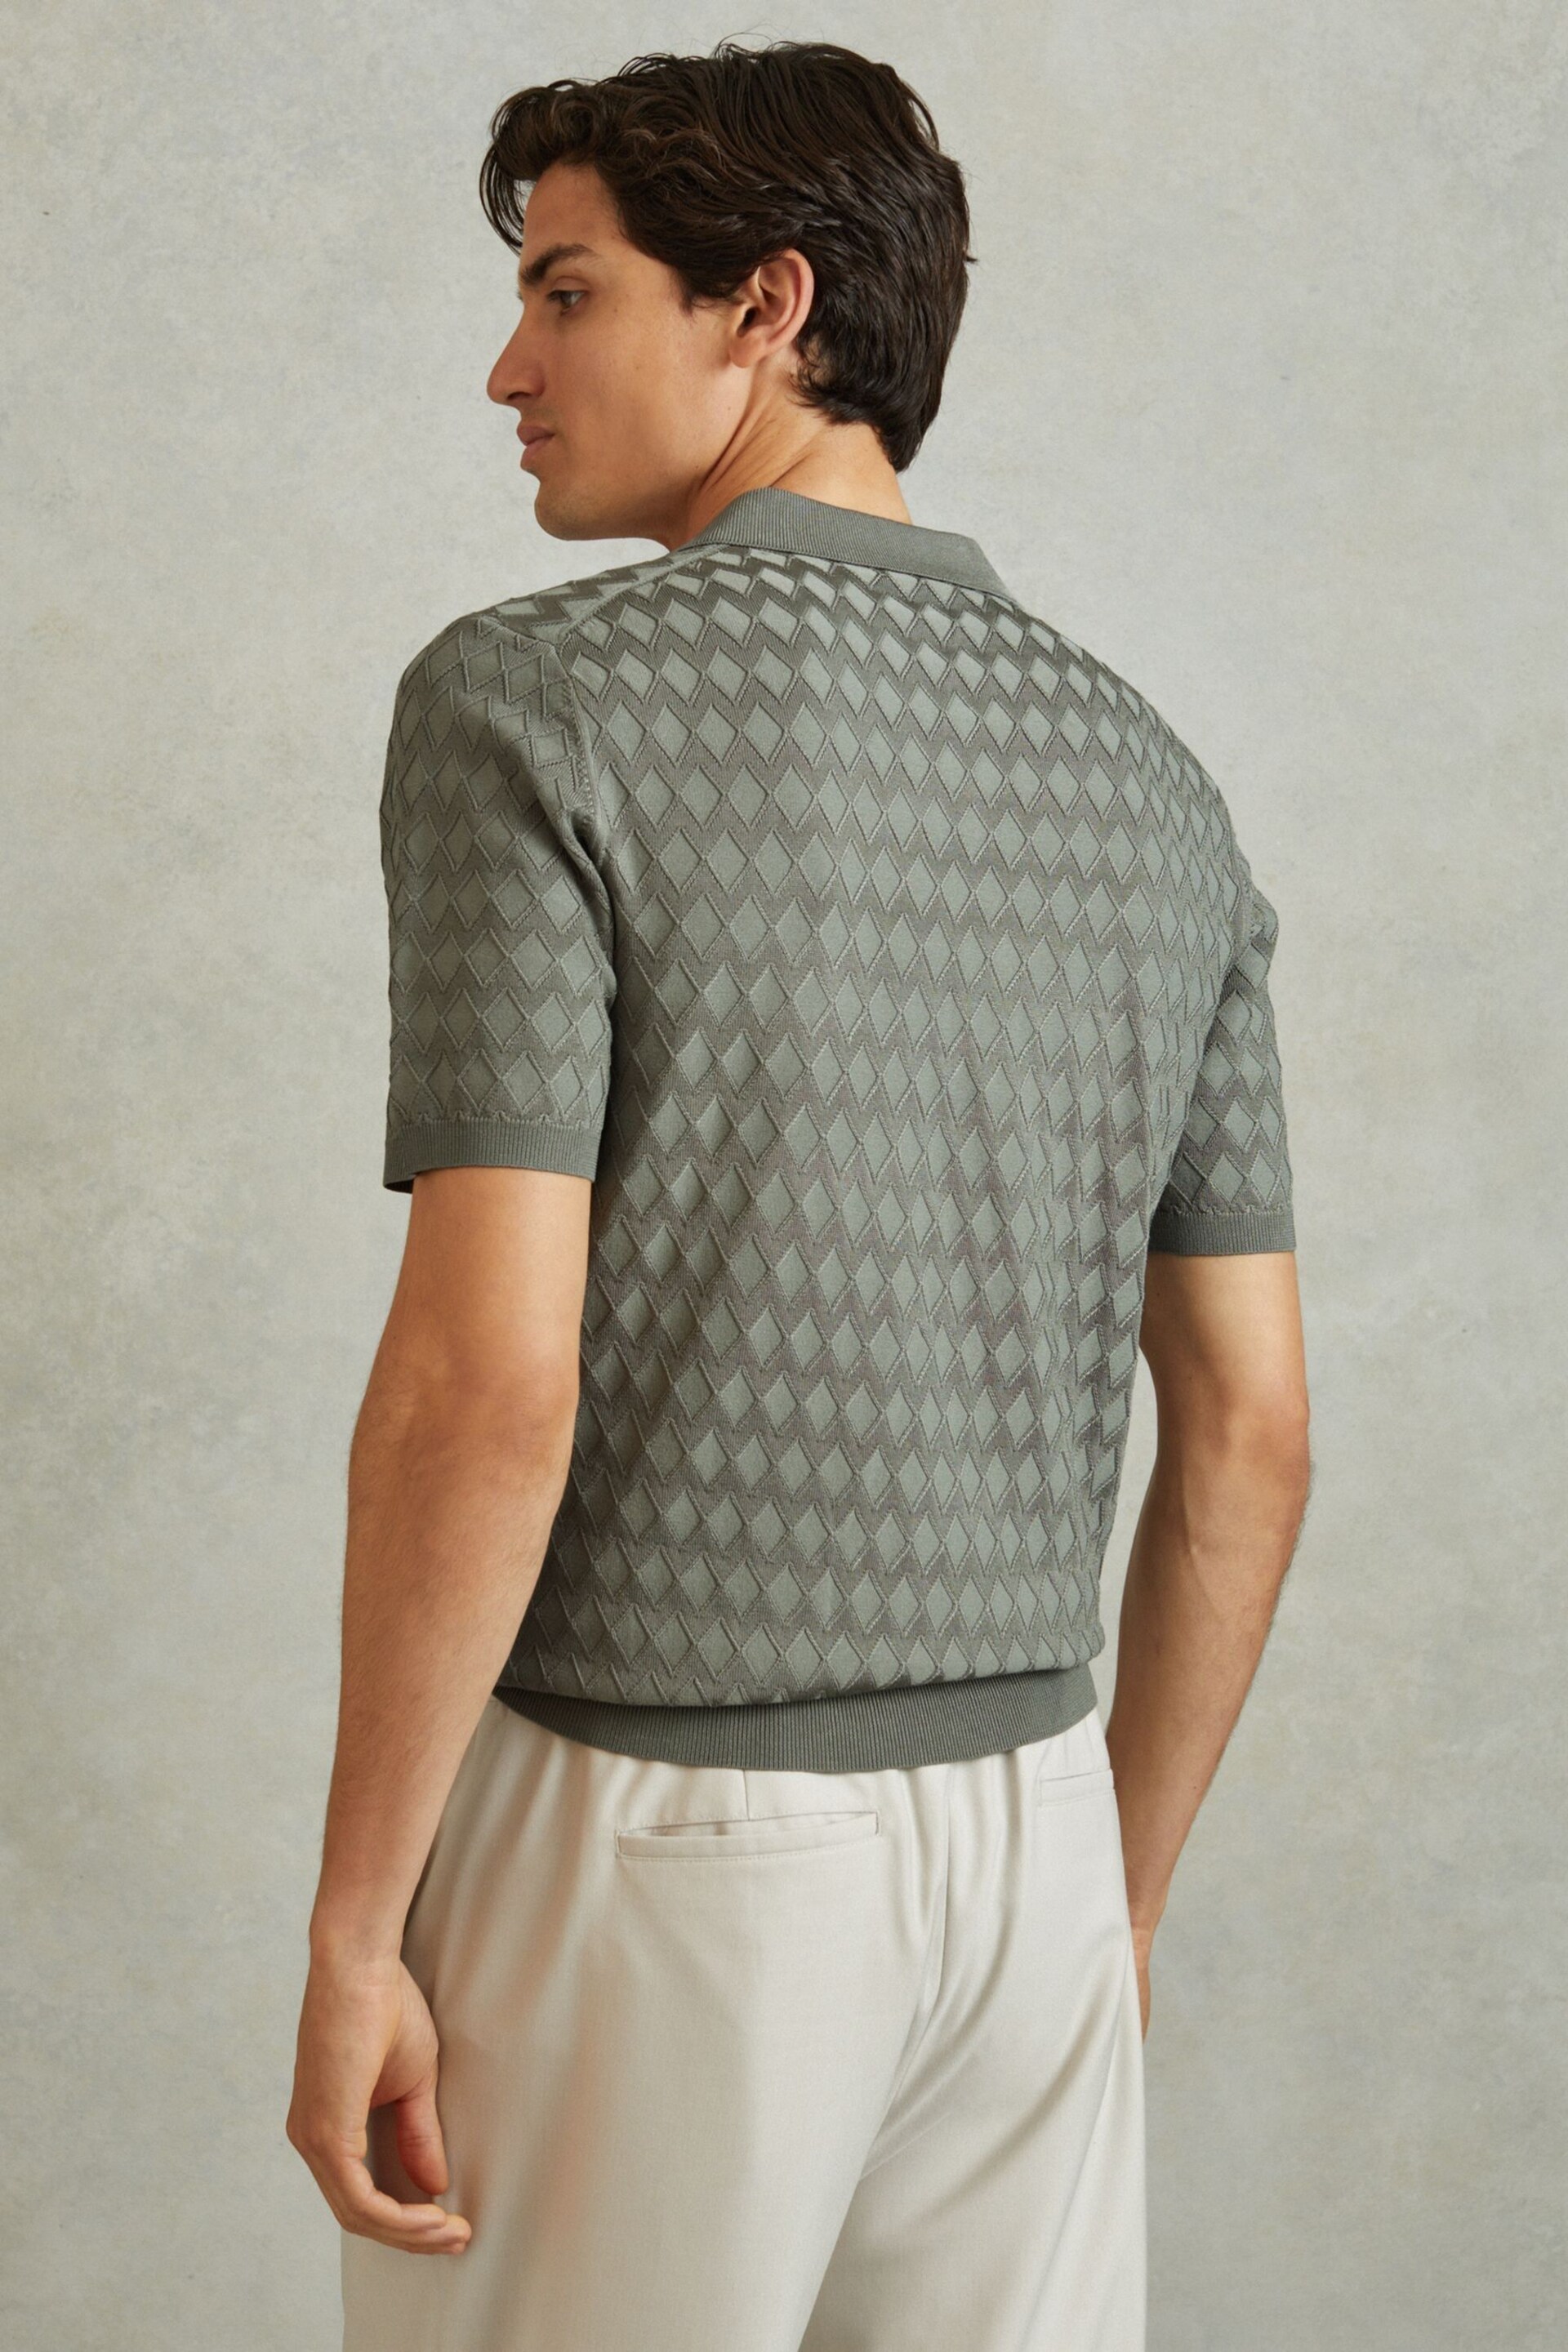 Reiss Sage Rizzo Half-Zip Knitted Polo Shirt - Image 4 of 5